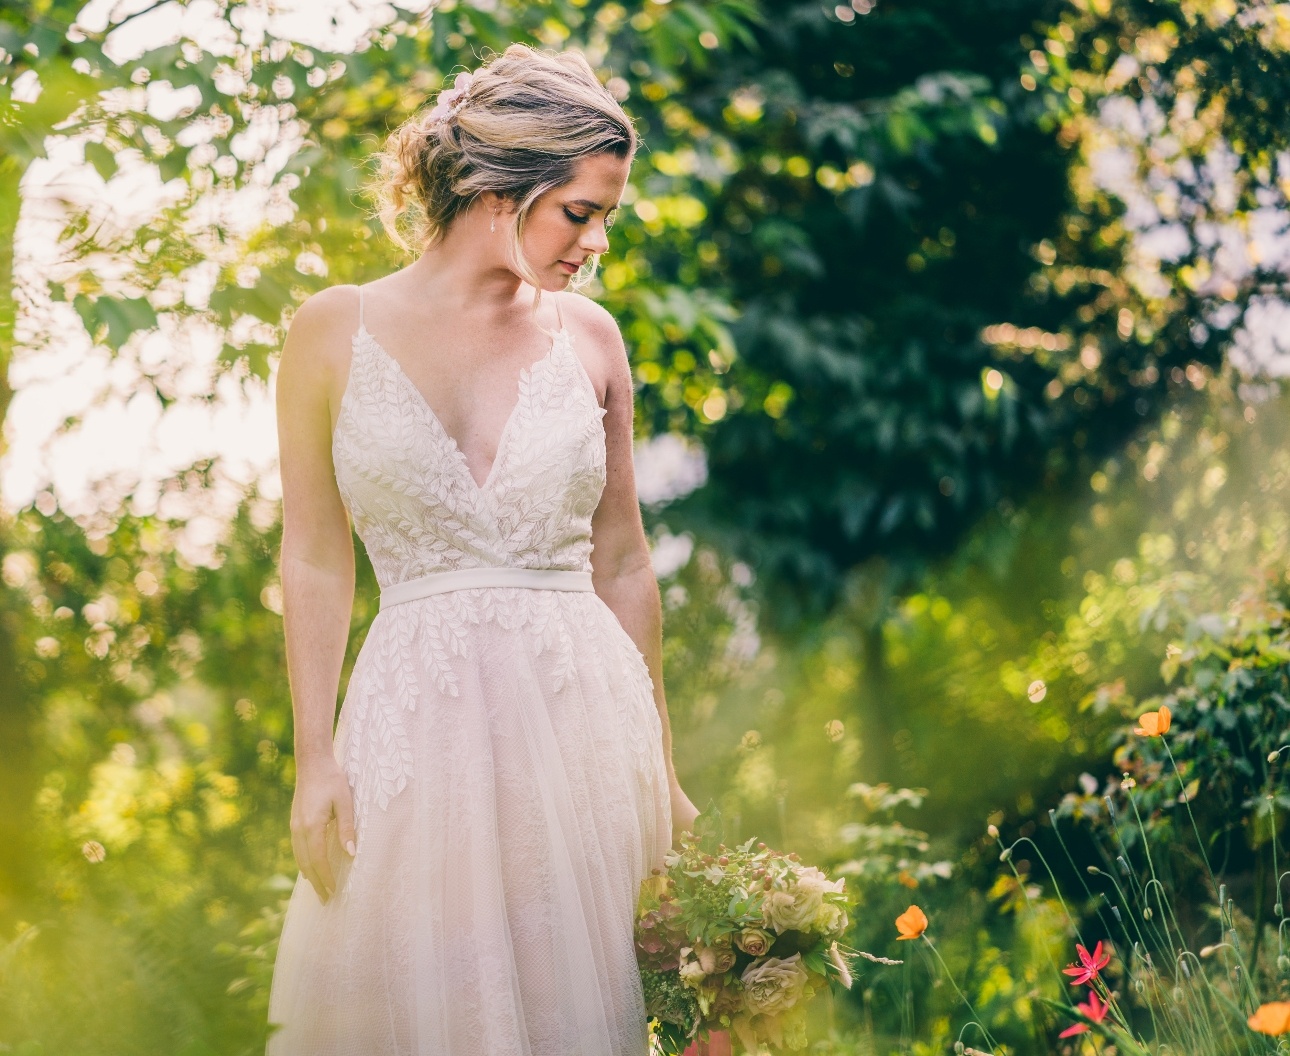 Posy & Pearl bridal boutique in Gloucestershire suggest ideas for outdoor ceremonies